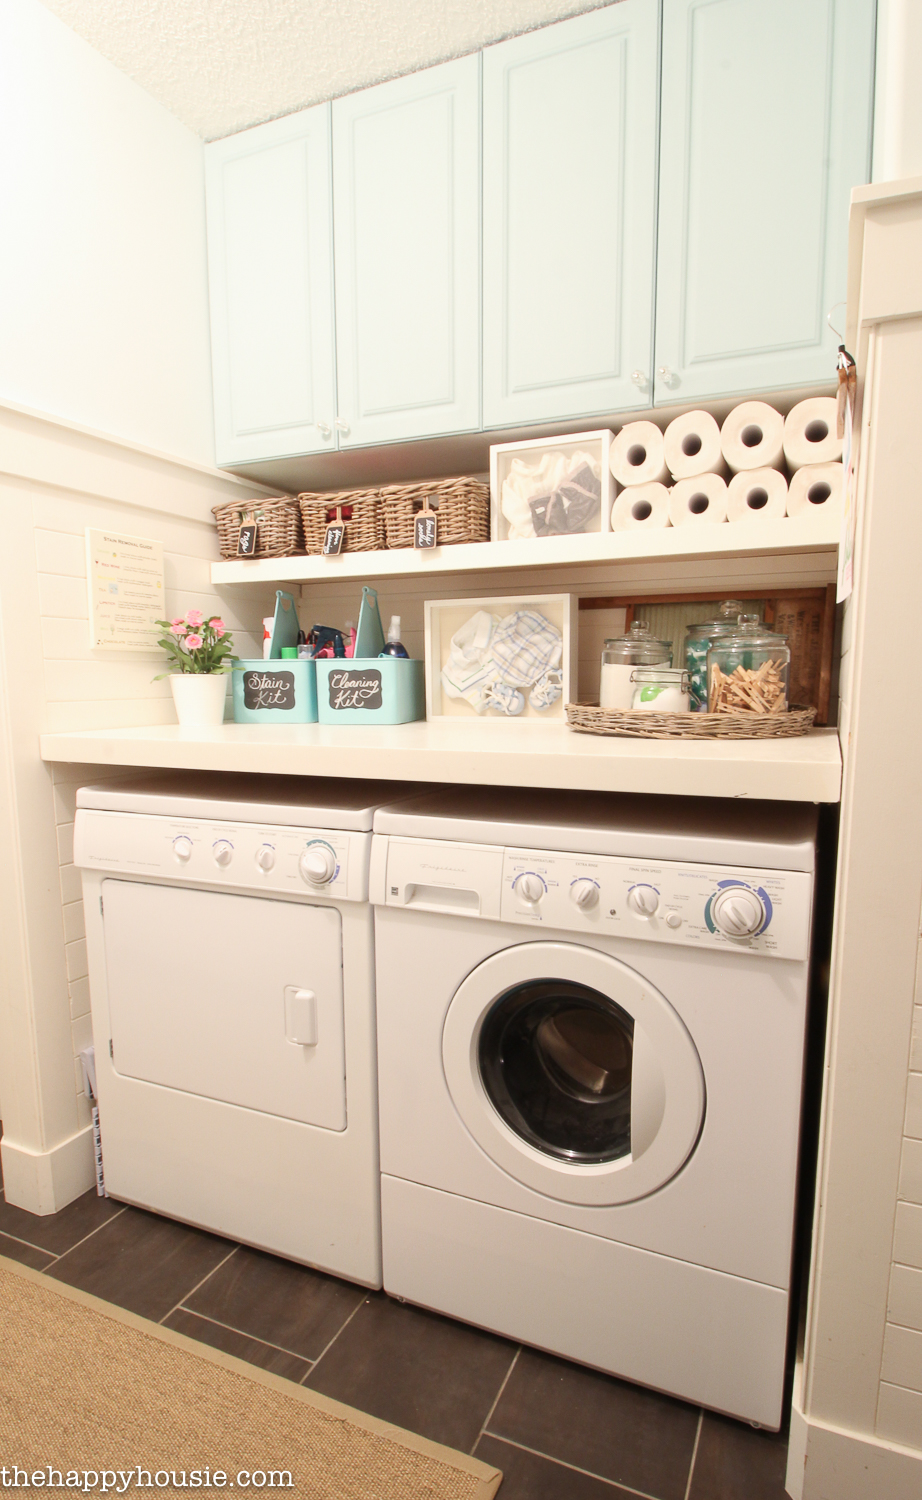 How to Organize Your Laundry Room Cabinets from 30daysblog